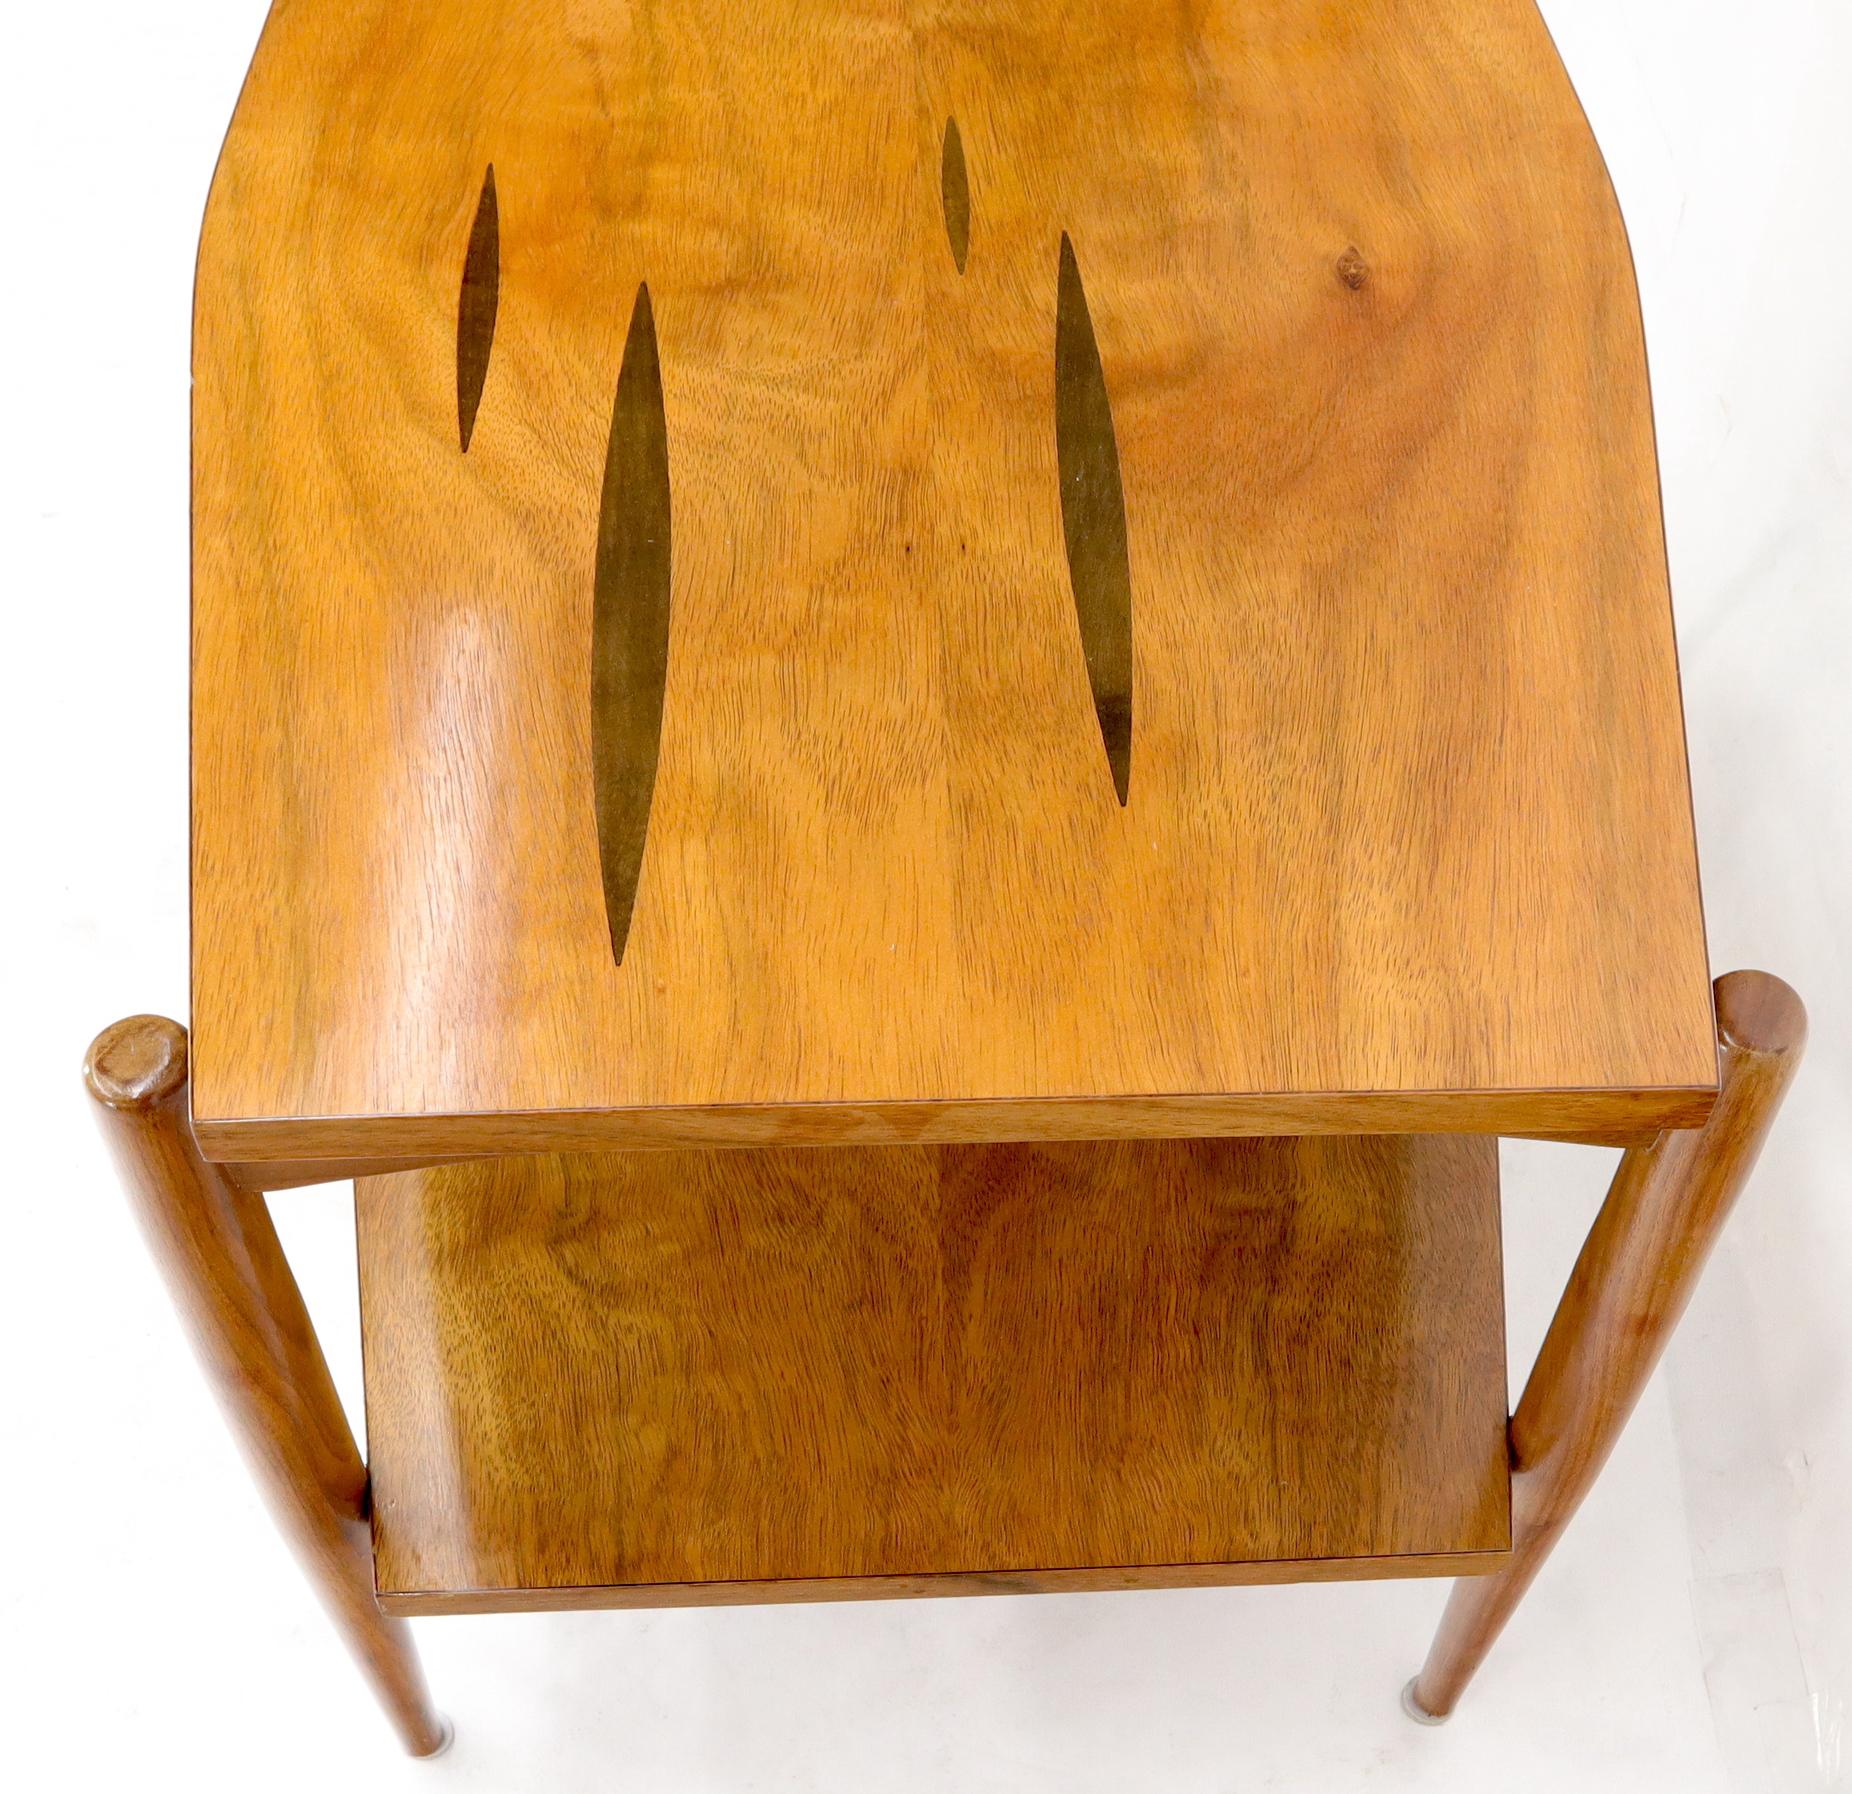 Pair of Mid-Century Modern inlaid tops boat shape one shelf exposed sculptured legs end side tables.